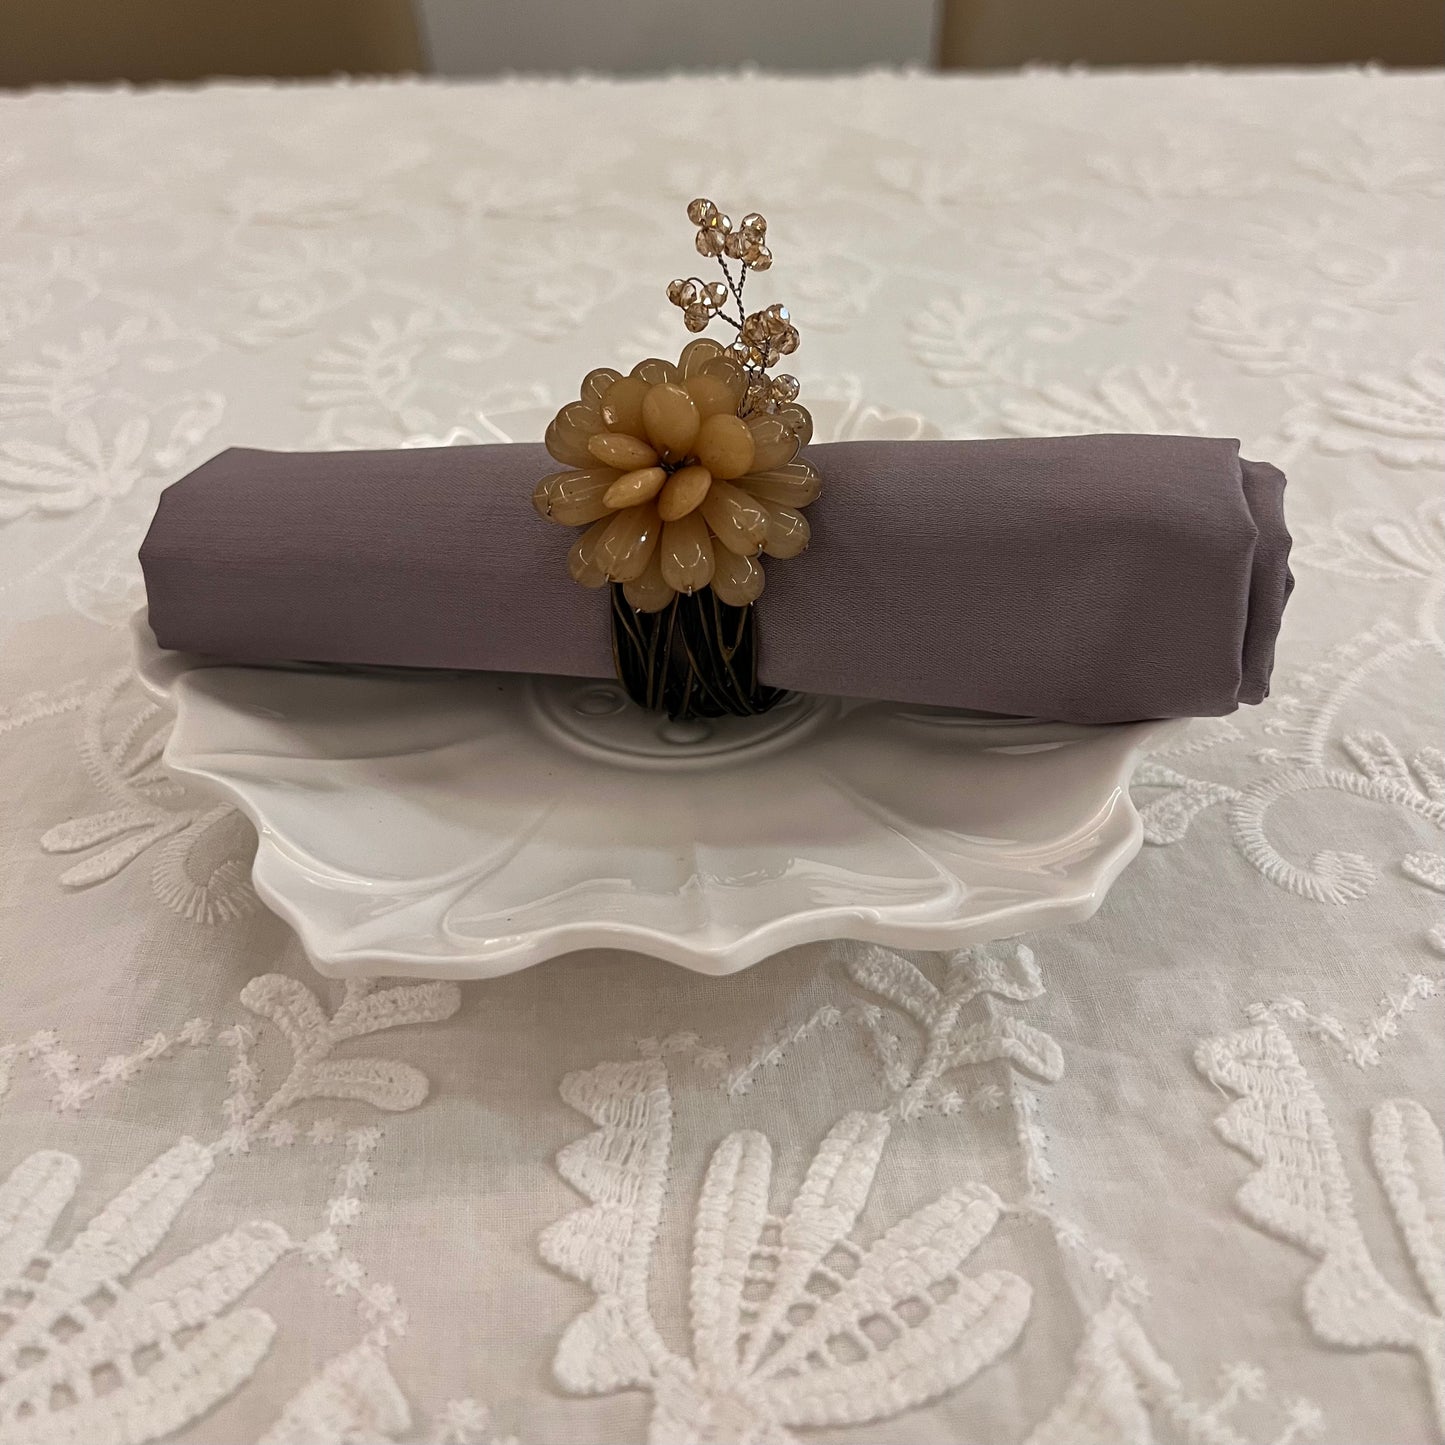 Napkin Rings with Stone Flower Accent - Pastel Pink